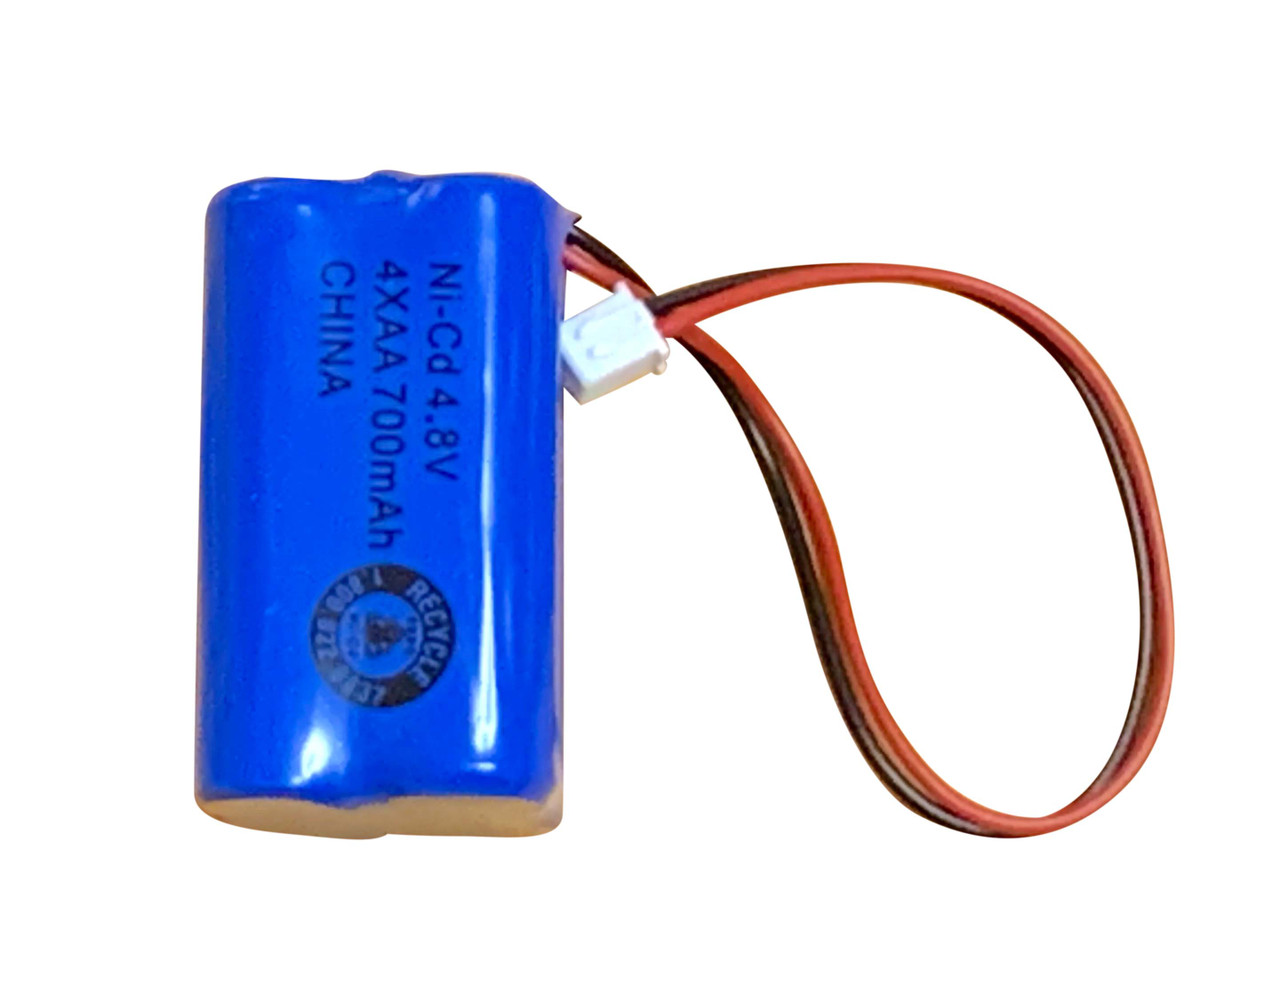 BST D-AA Replacement Battery 4.8V 700Mah For Emergency Lighting